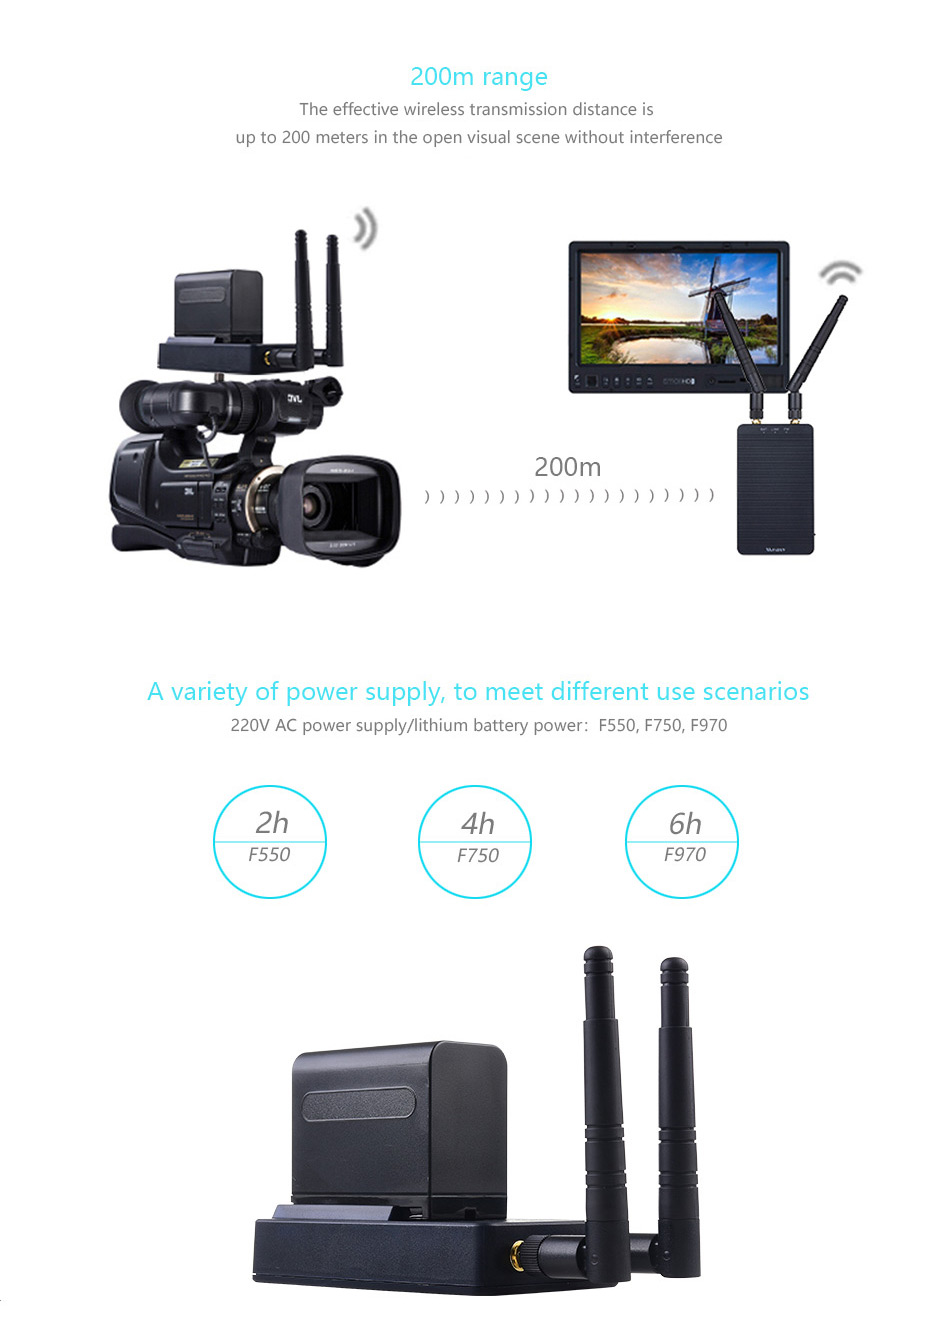 Measy-Tour-T1-4K-HD-200M-Wireless-HDMI-Video-Transmission-System-5G-Image-Transmitter-and-Receiver-K-1706983-5